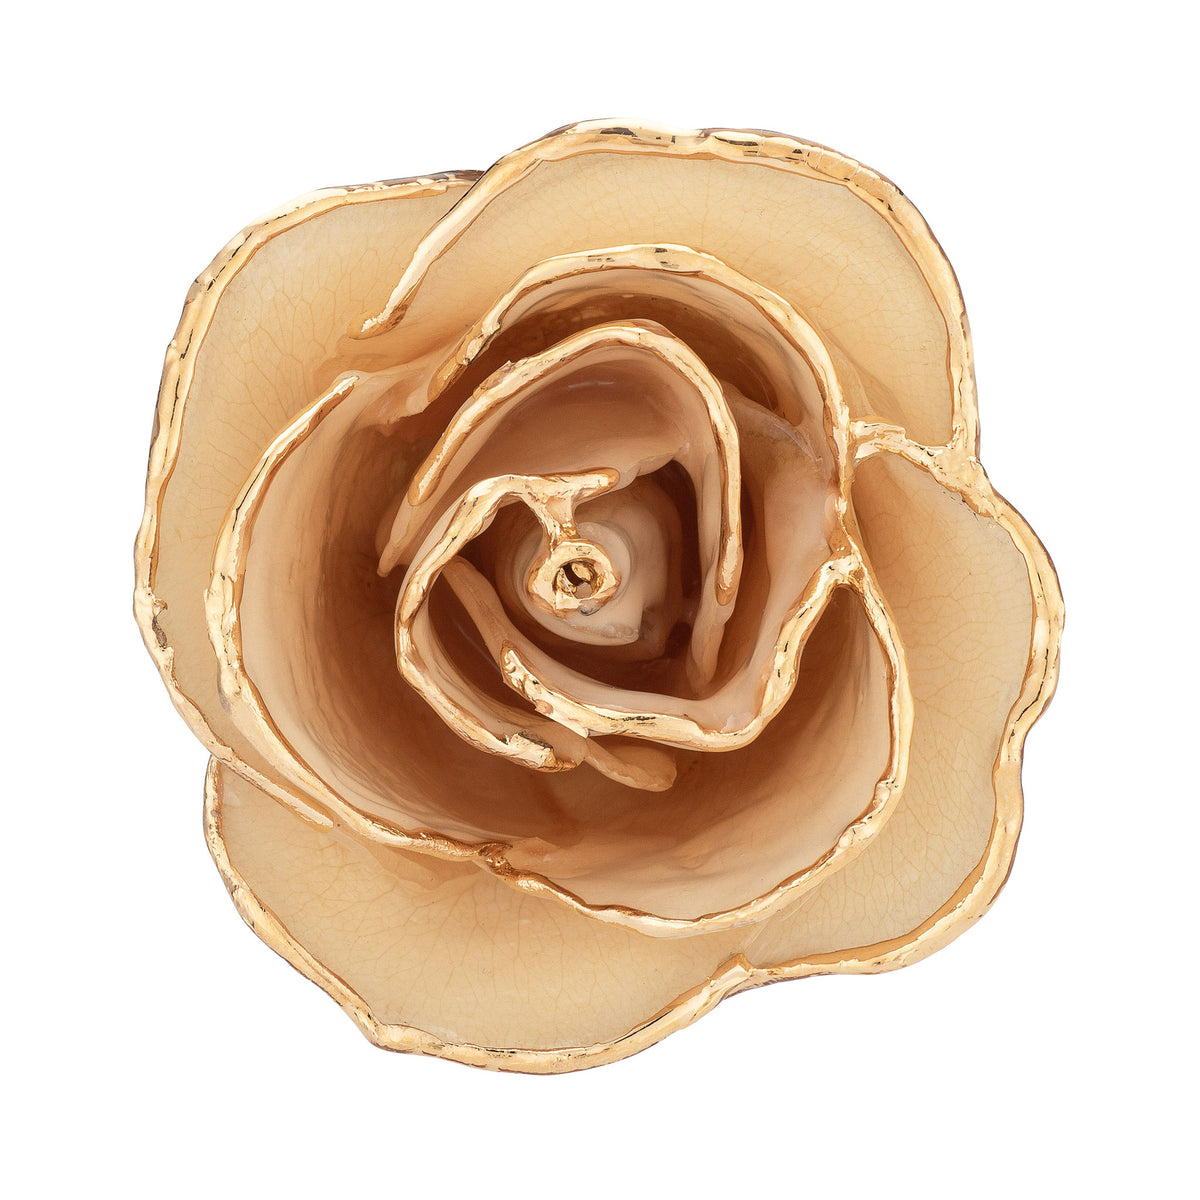 24K Gold Trimmed Forever Rose with White Petals. View of Stem, Leaves, and Rose Petals and Showing Detail of Gold Trim view from top